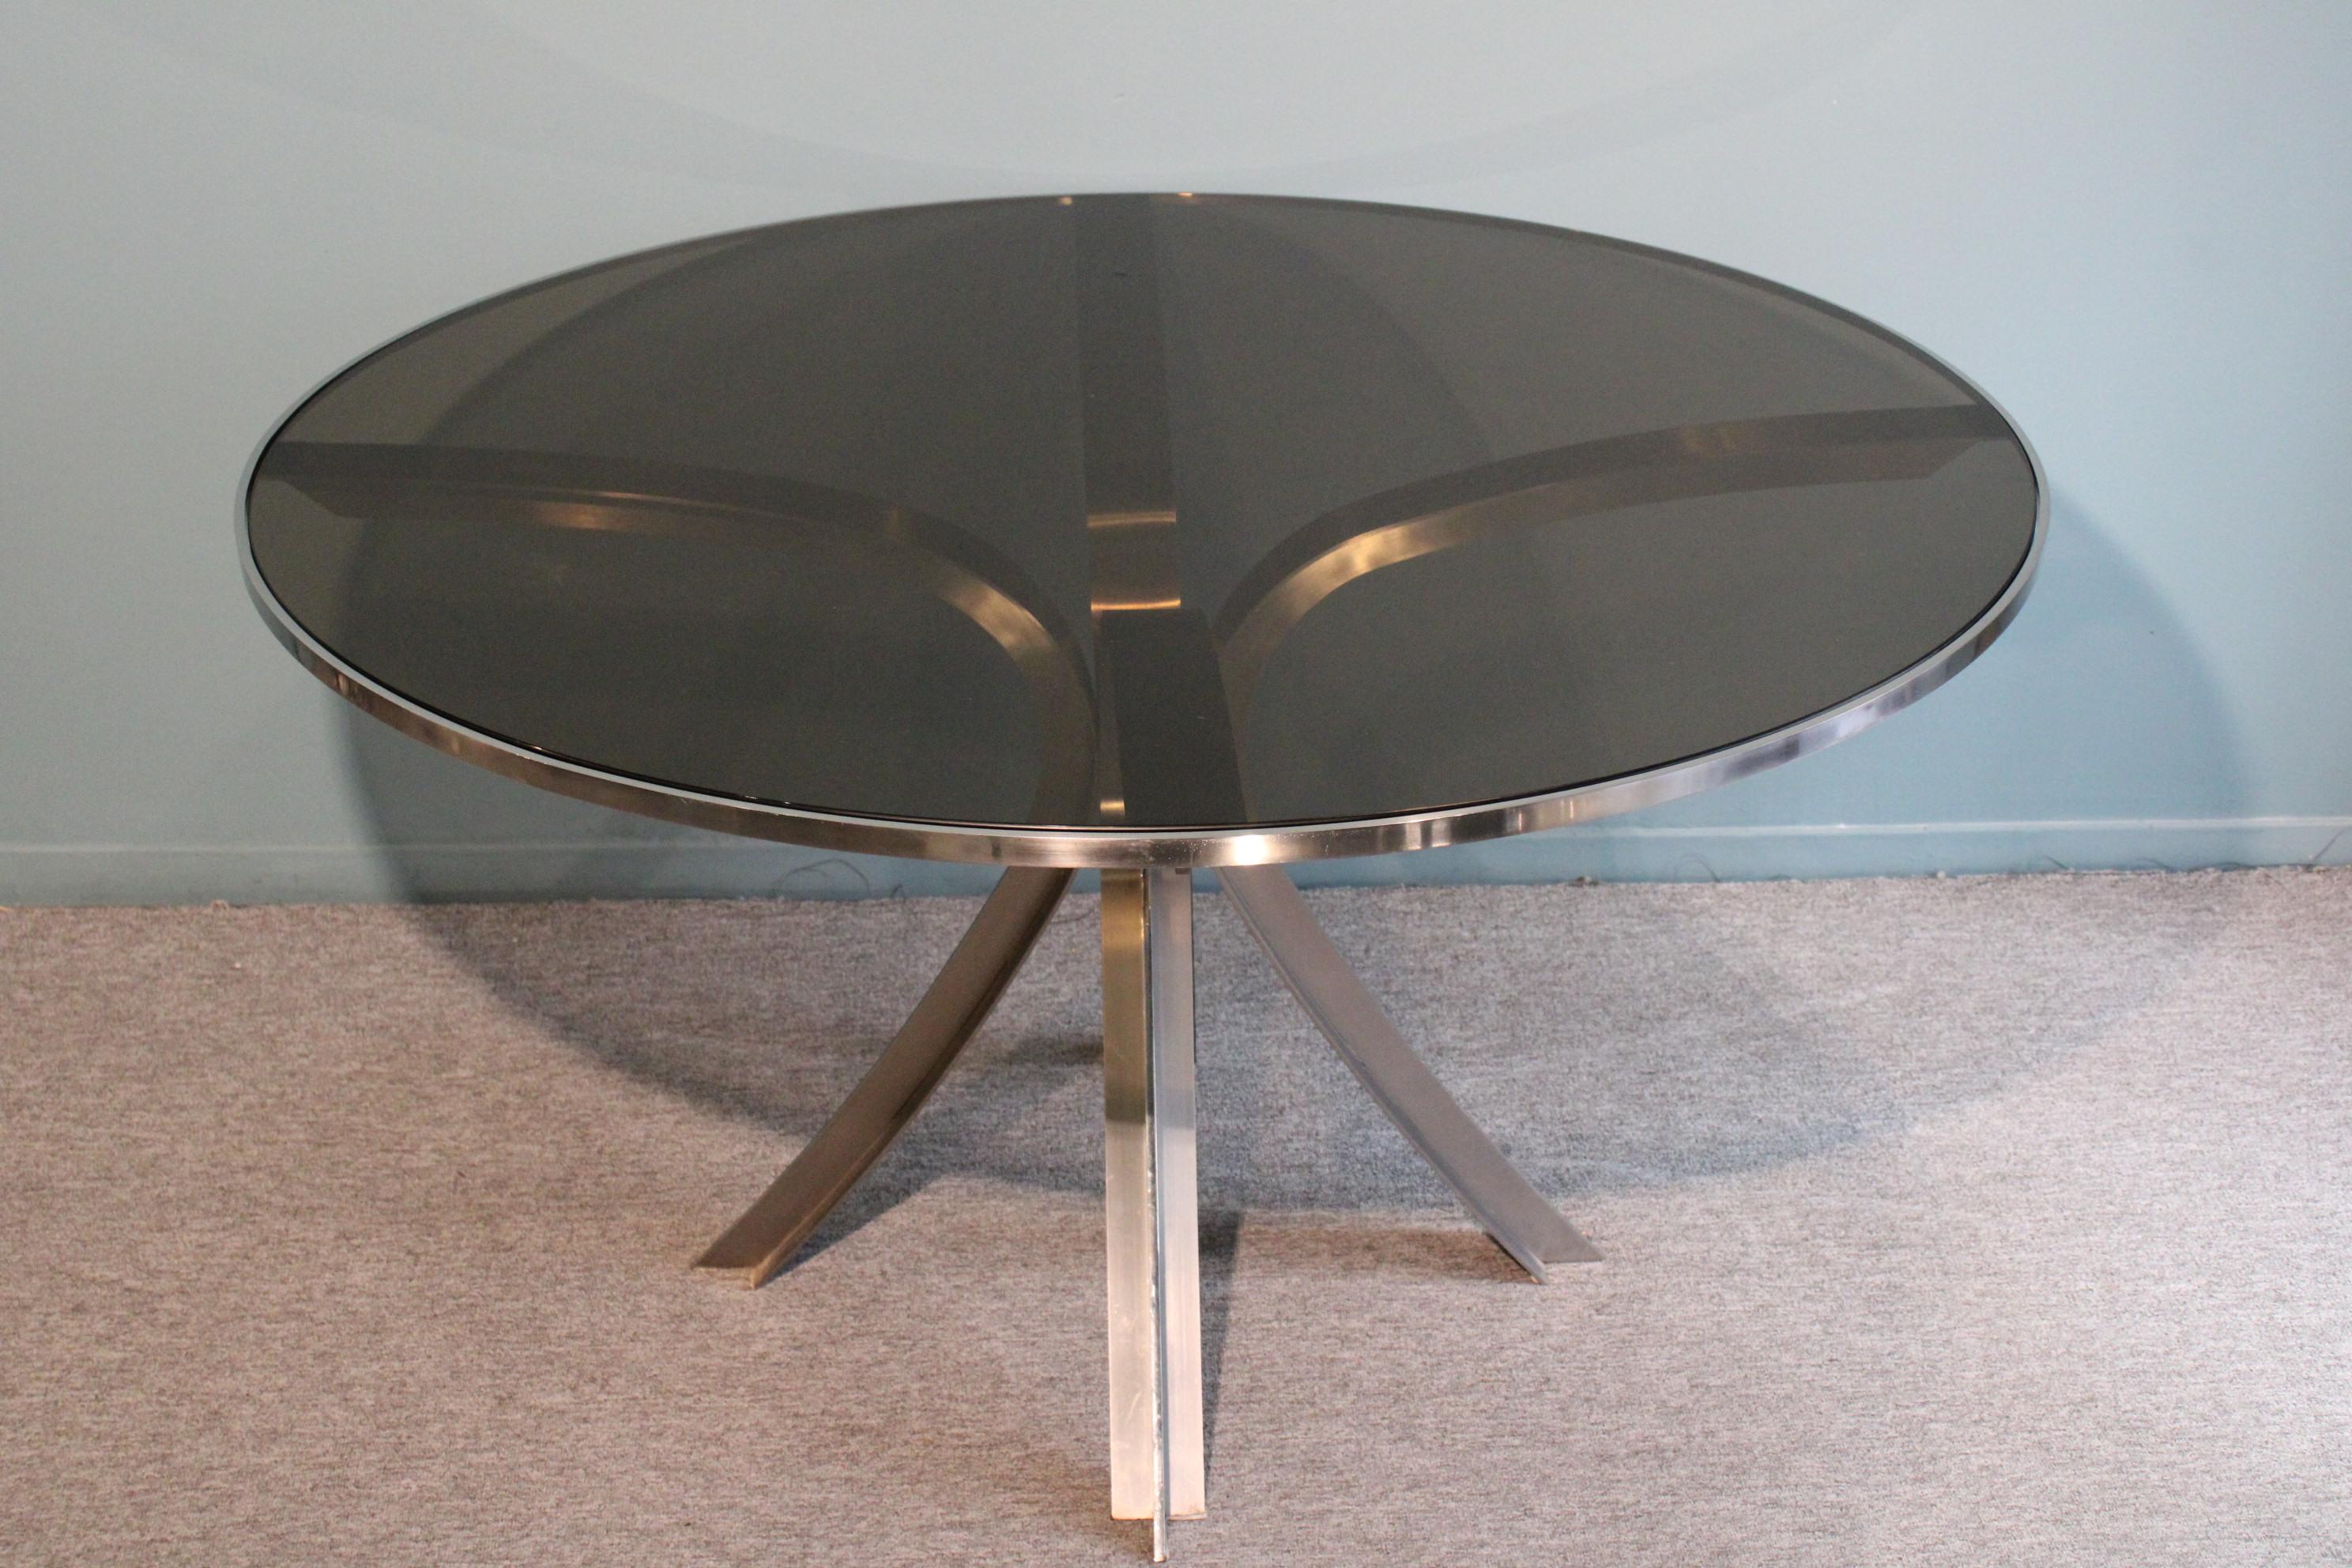 Dinning table designed by Xavier Feal.
Smoked glass top and stainless steel base.
circa 1970.